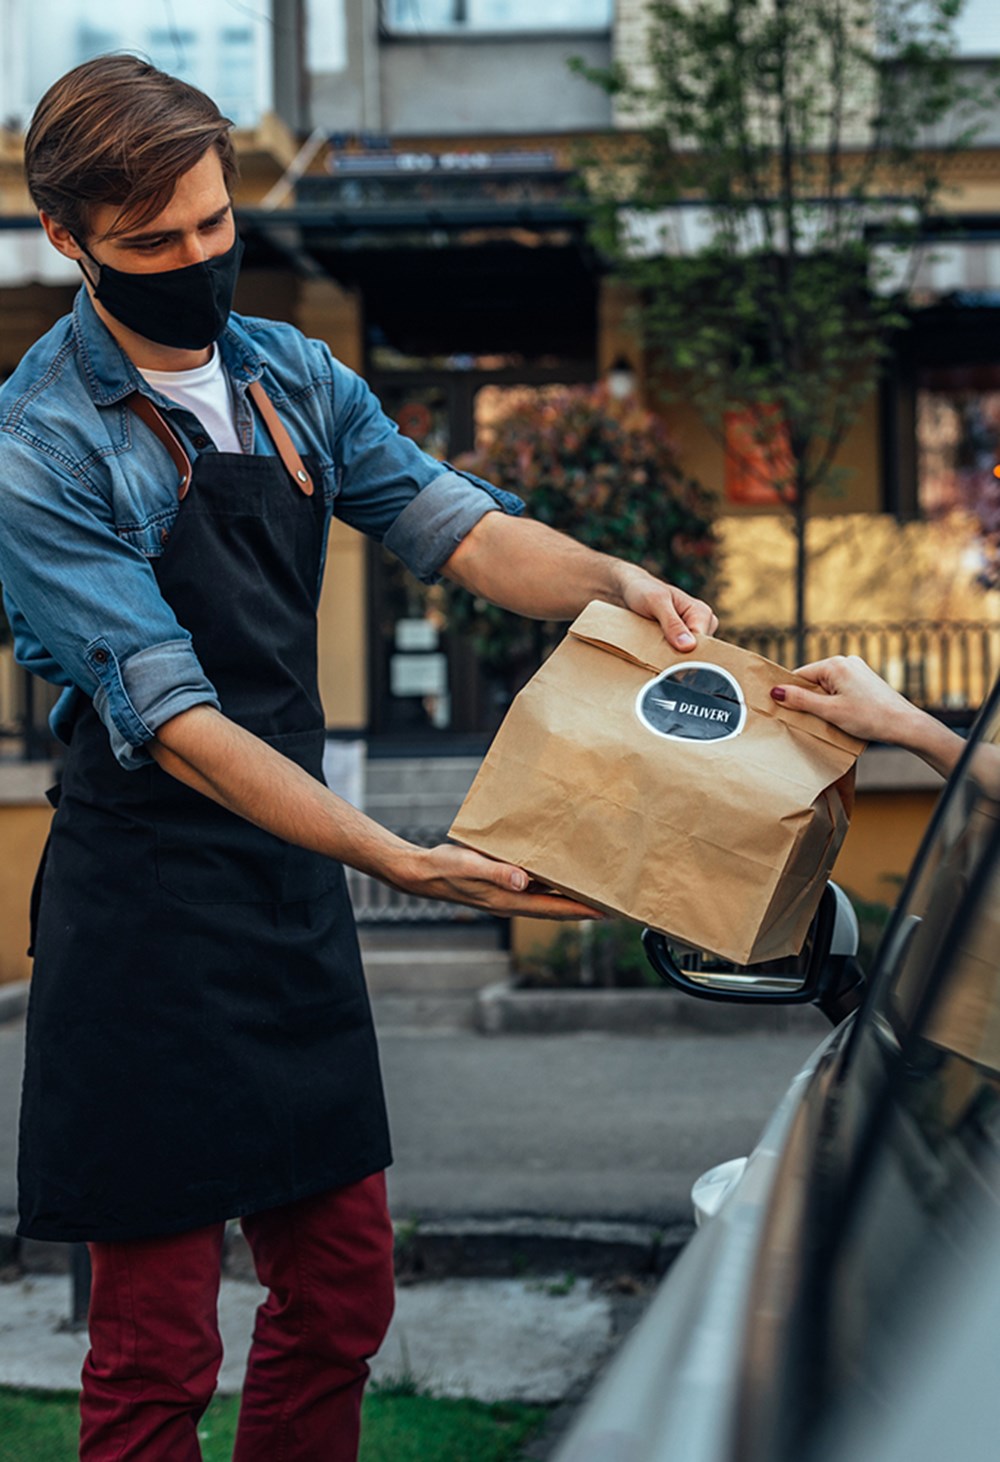 A masked restaurant employee handing a sealed curbside order to a customer in a parked car.